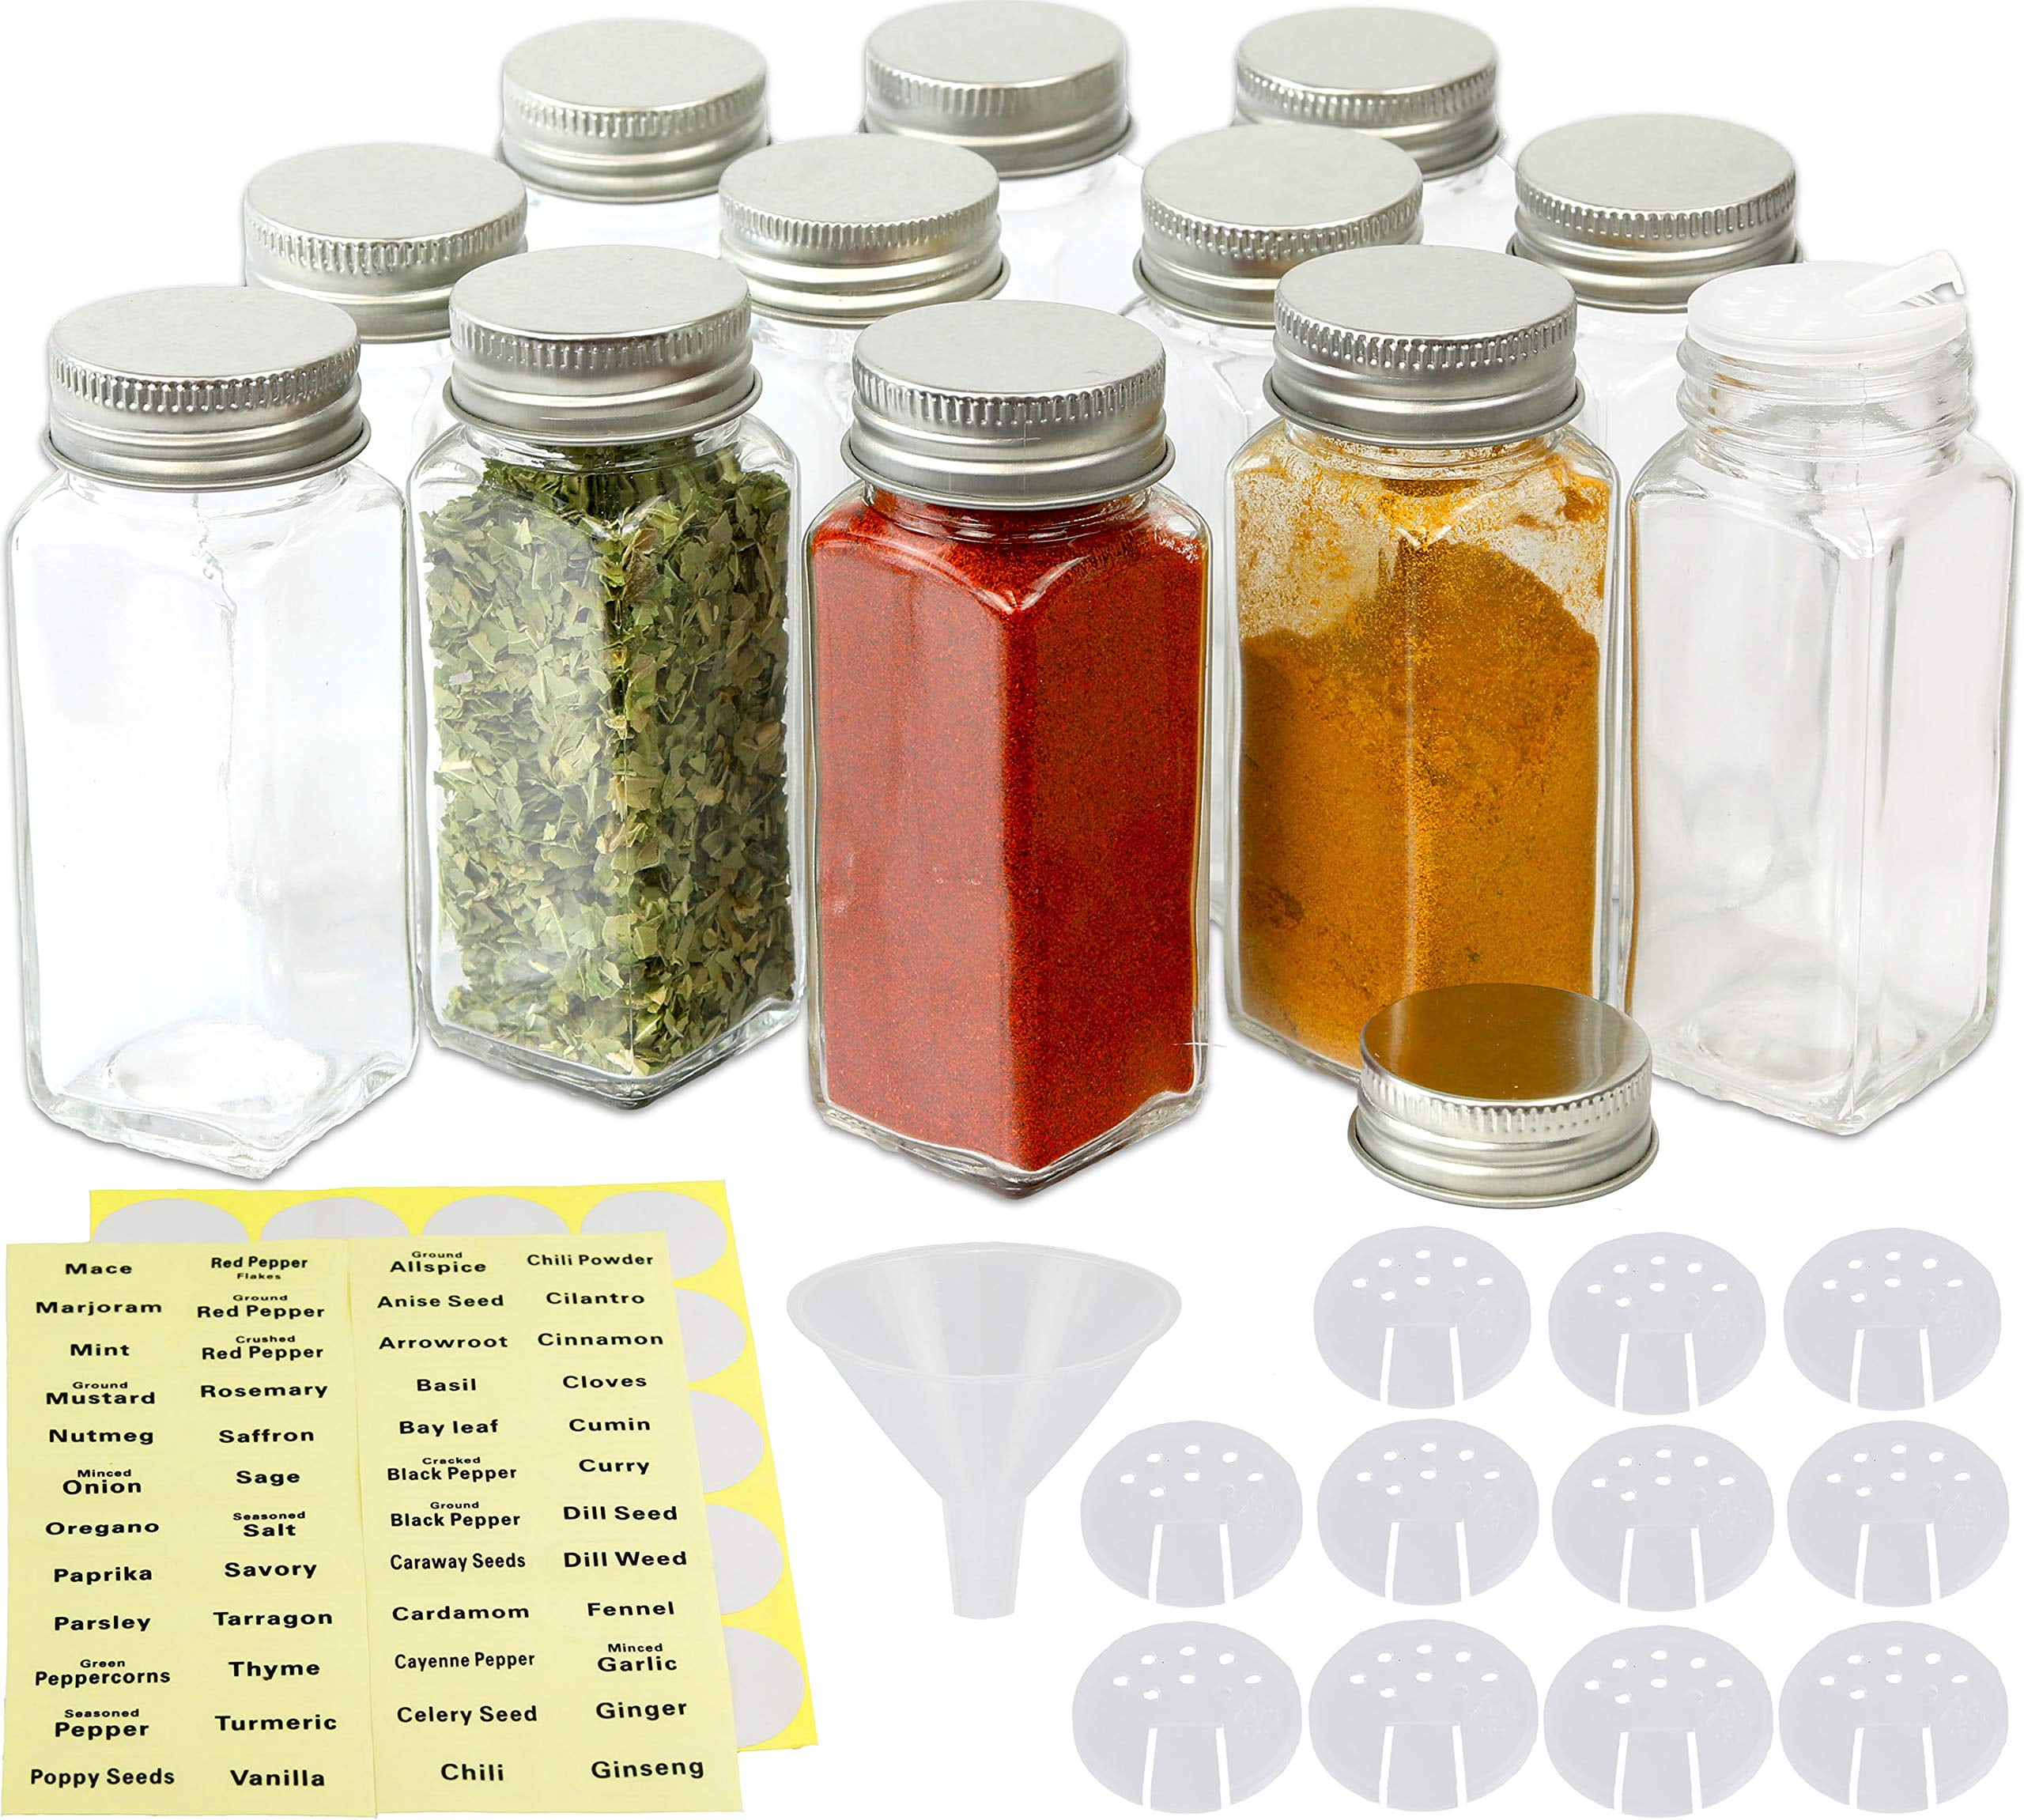 Limei 1 Pack Glass Spice Jars, Reusable Clear 4 oz Square Seasoning Containers with Silver Metal Caps and Pour/Sift Shaker Lids Spice Jars with Labels